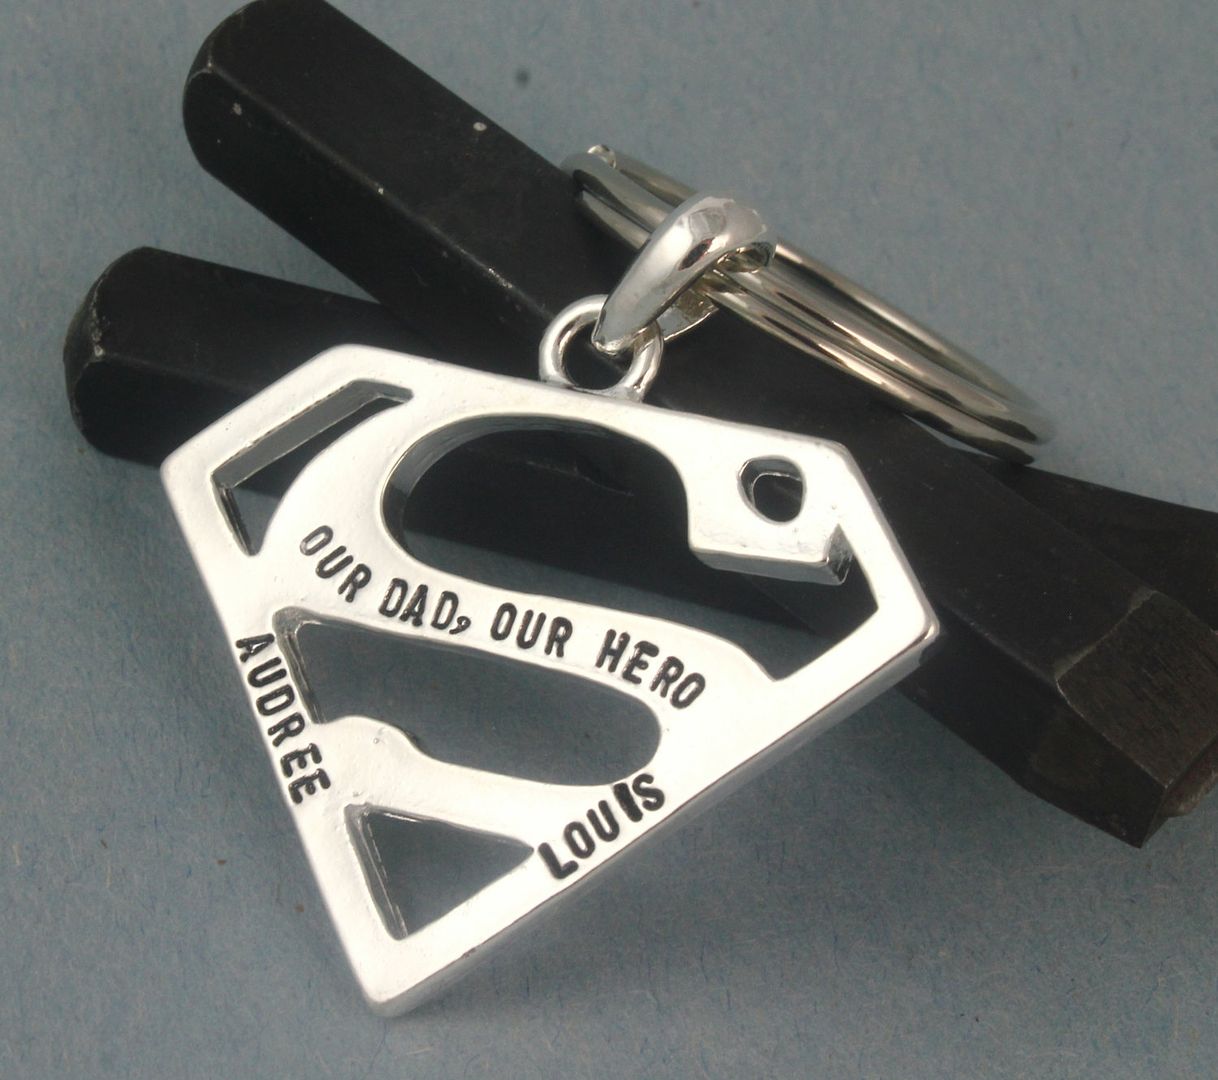 Personalized Father's Day gifts: Our dad, Our hero keychain at Stampin' Off the Path